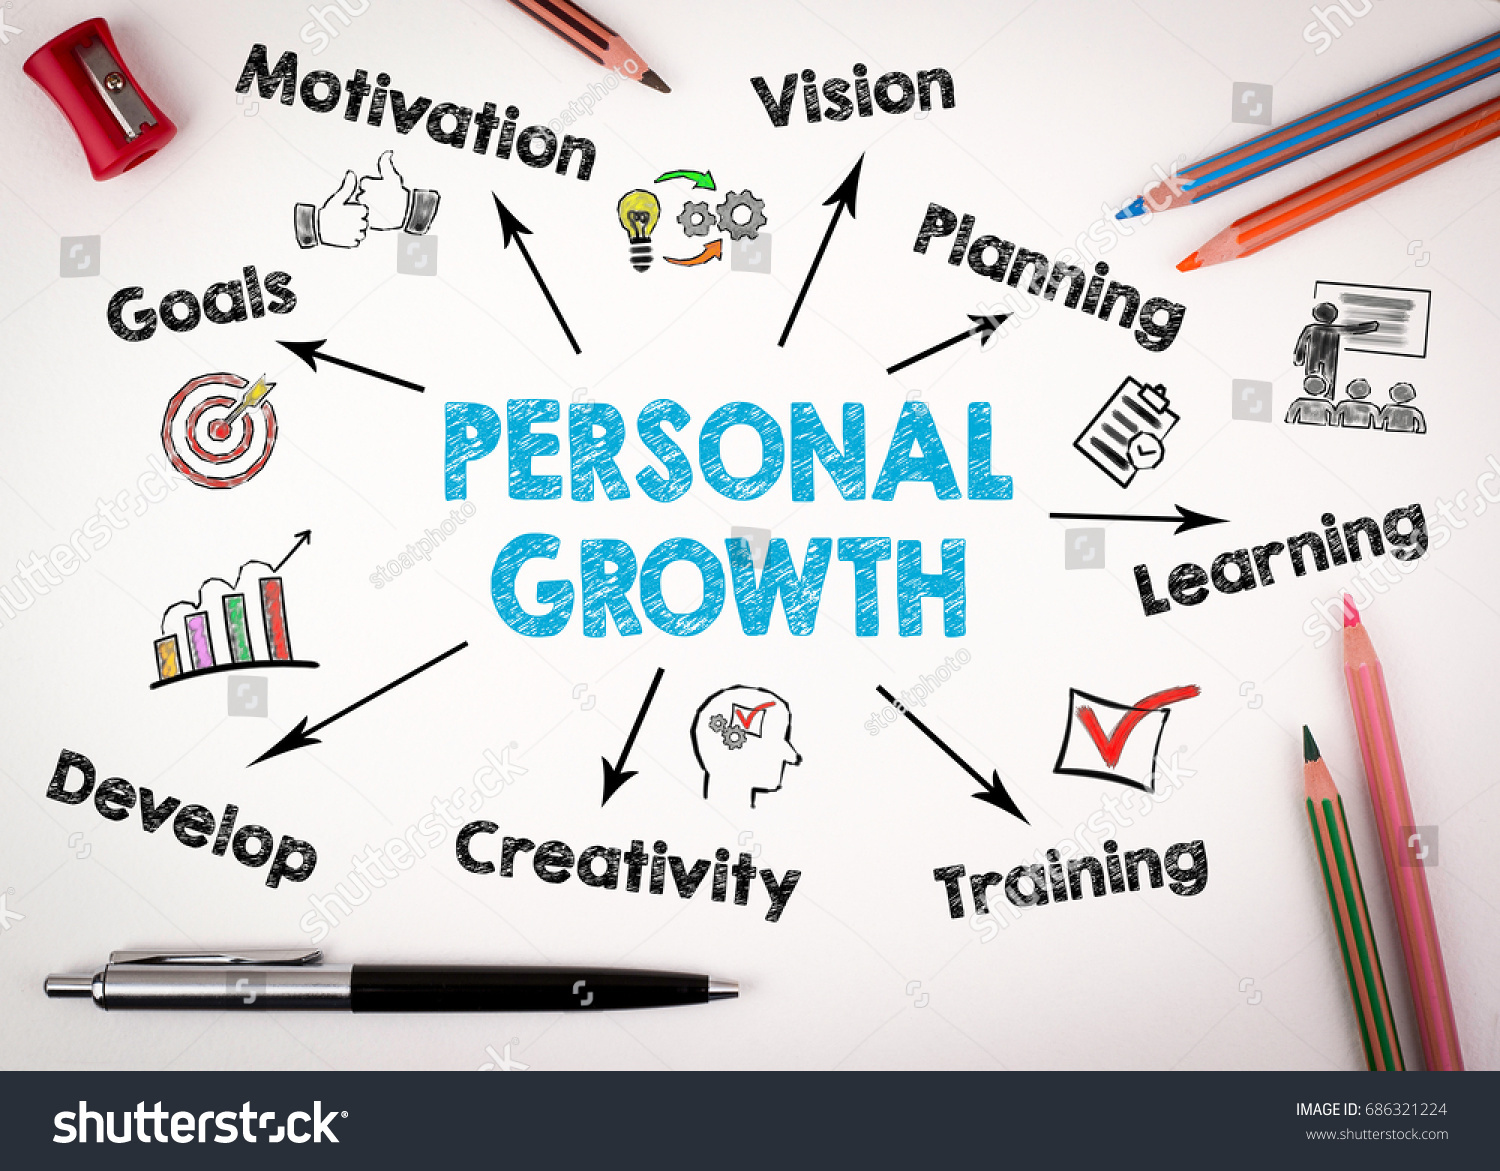 Personal Growth Concept. Chart with keywords and icons on white background